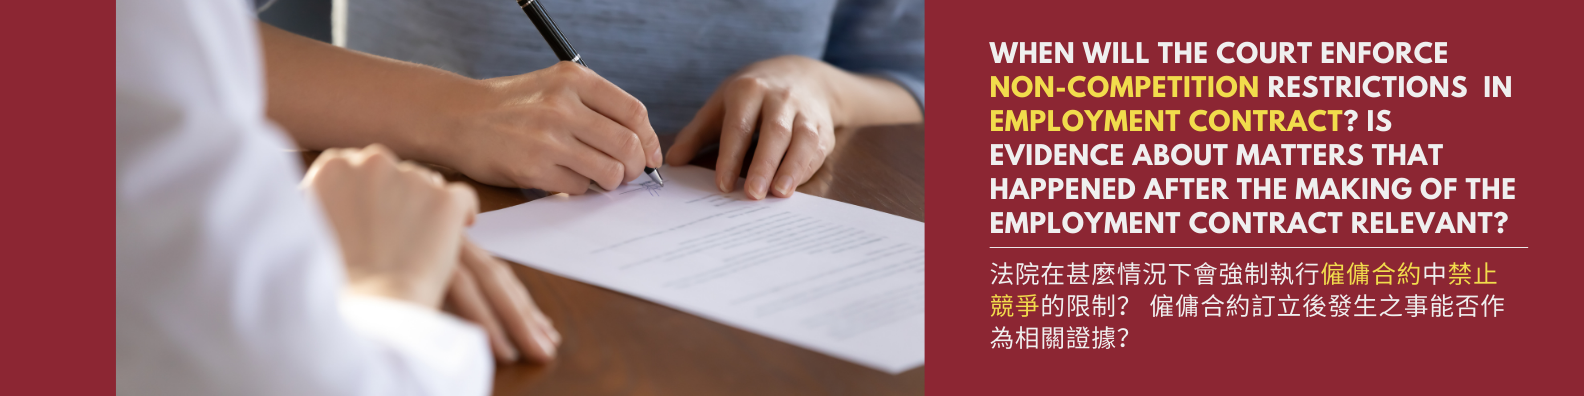 When will the court enforce non-competition restrictions  in employment contract? Is evidence about matters that happened after the making of the employment contract relevant?